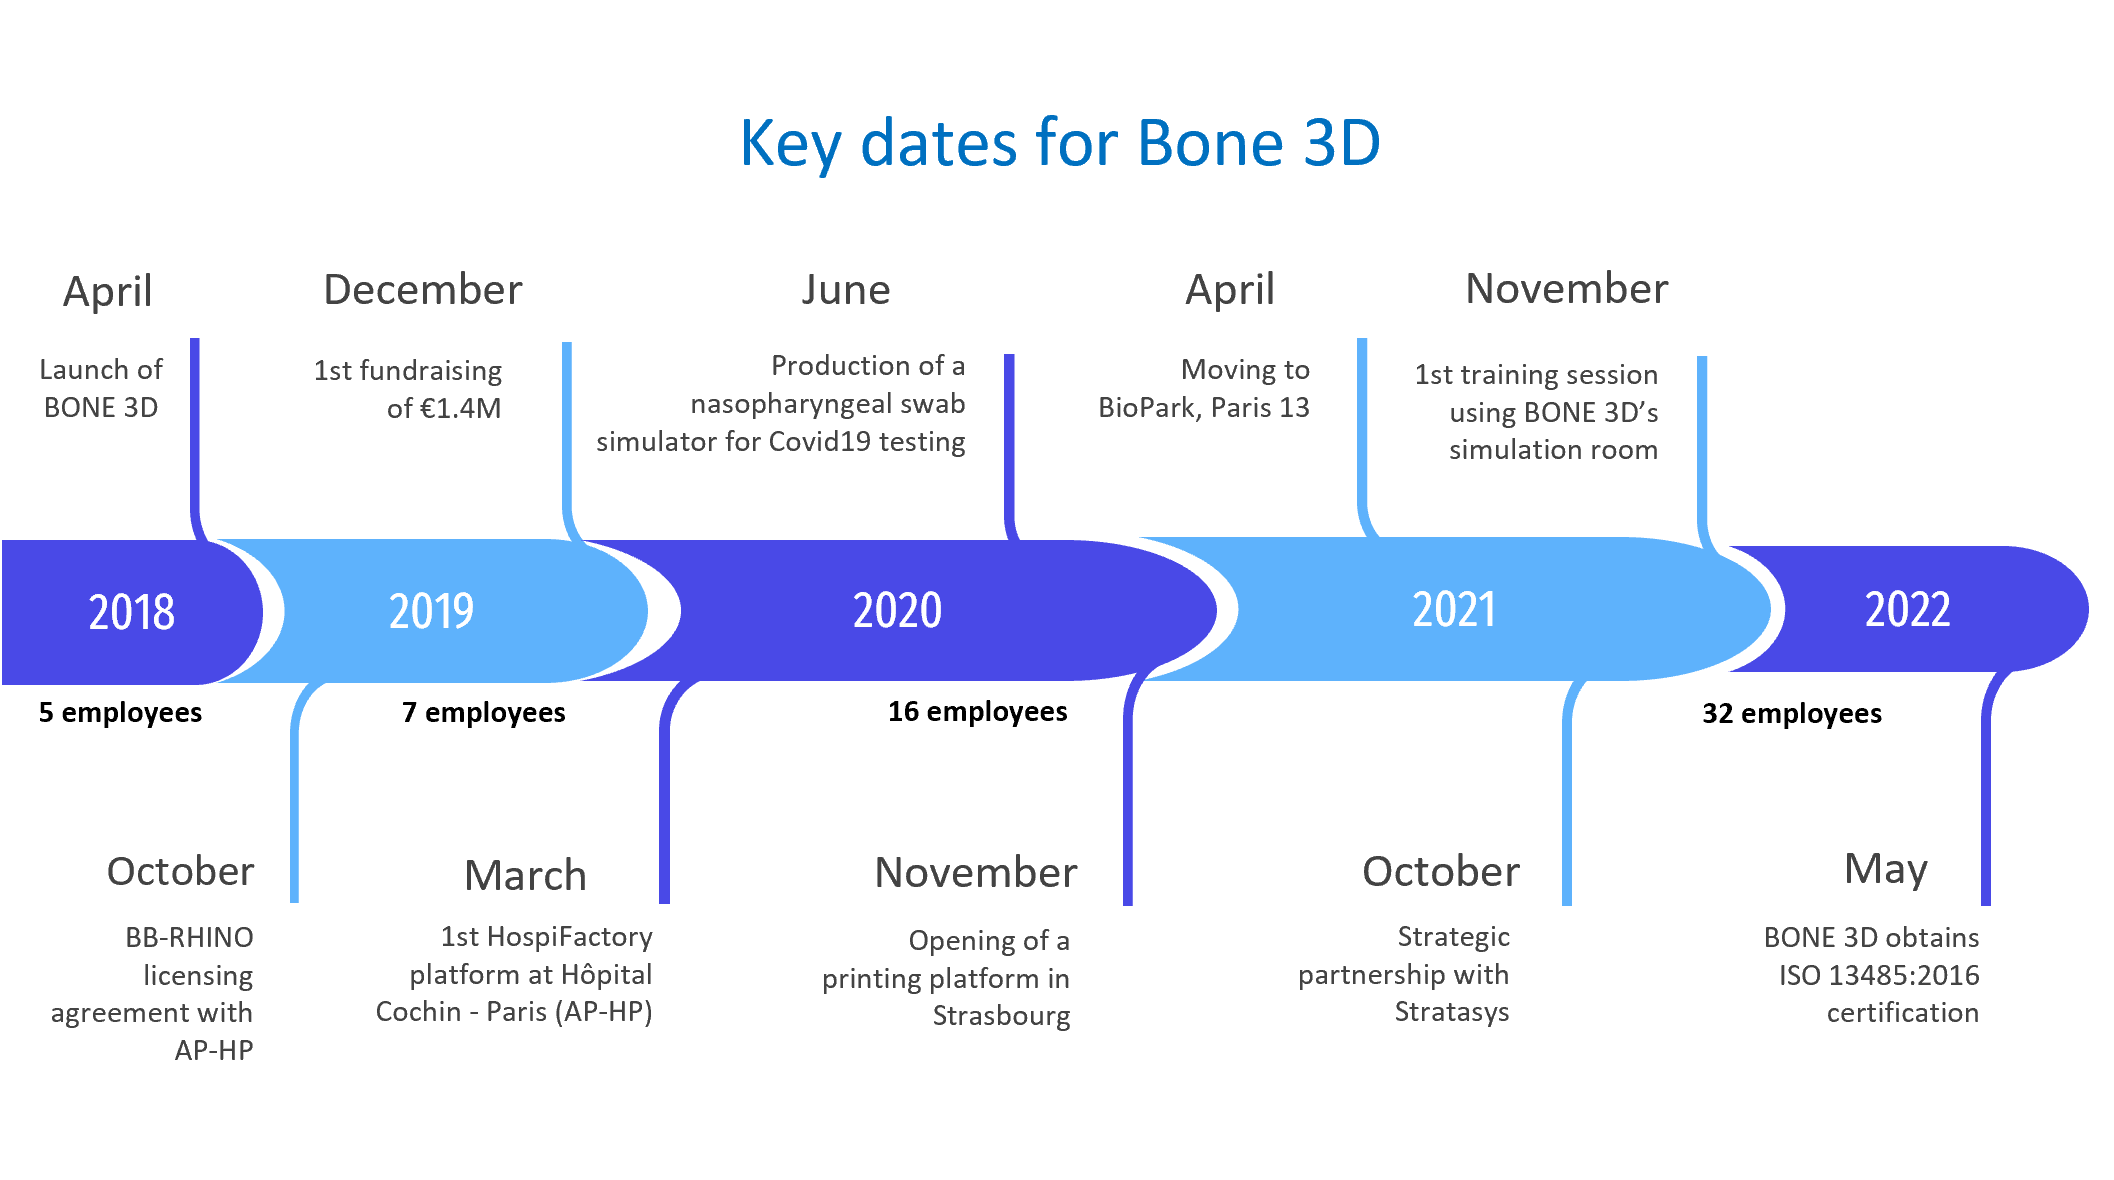 history and key dates for bone 3d